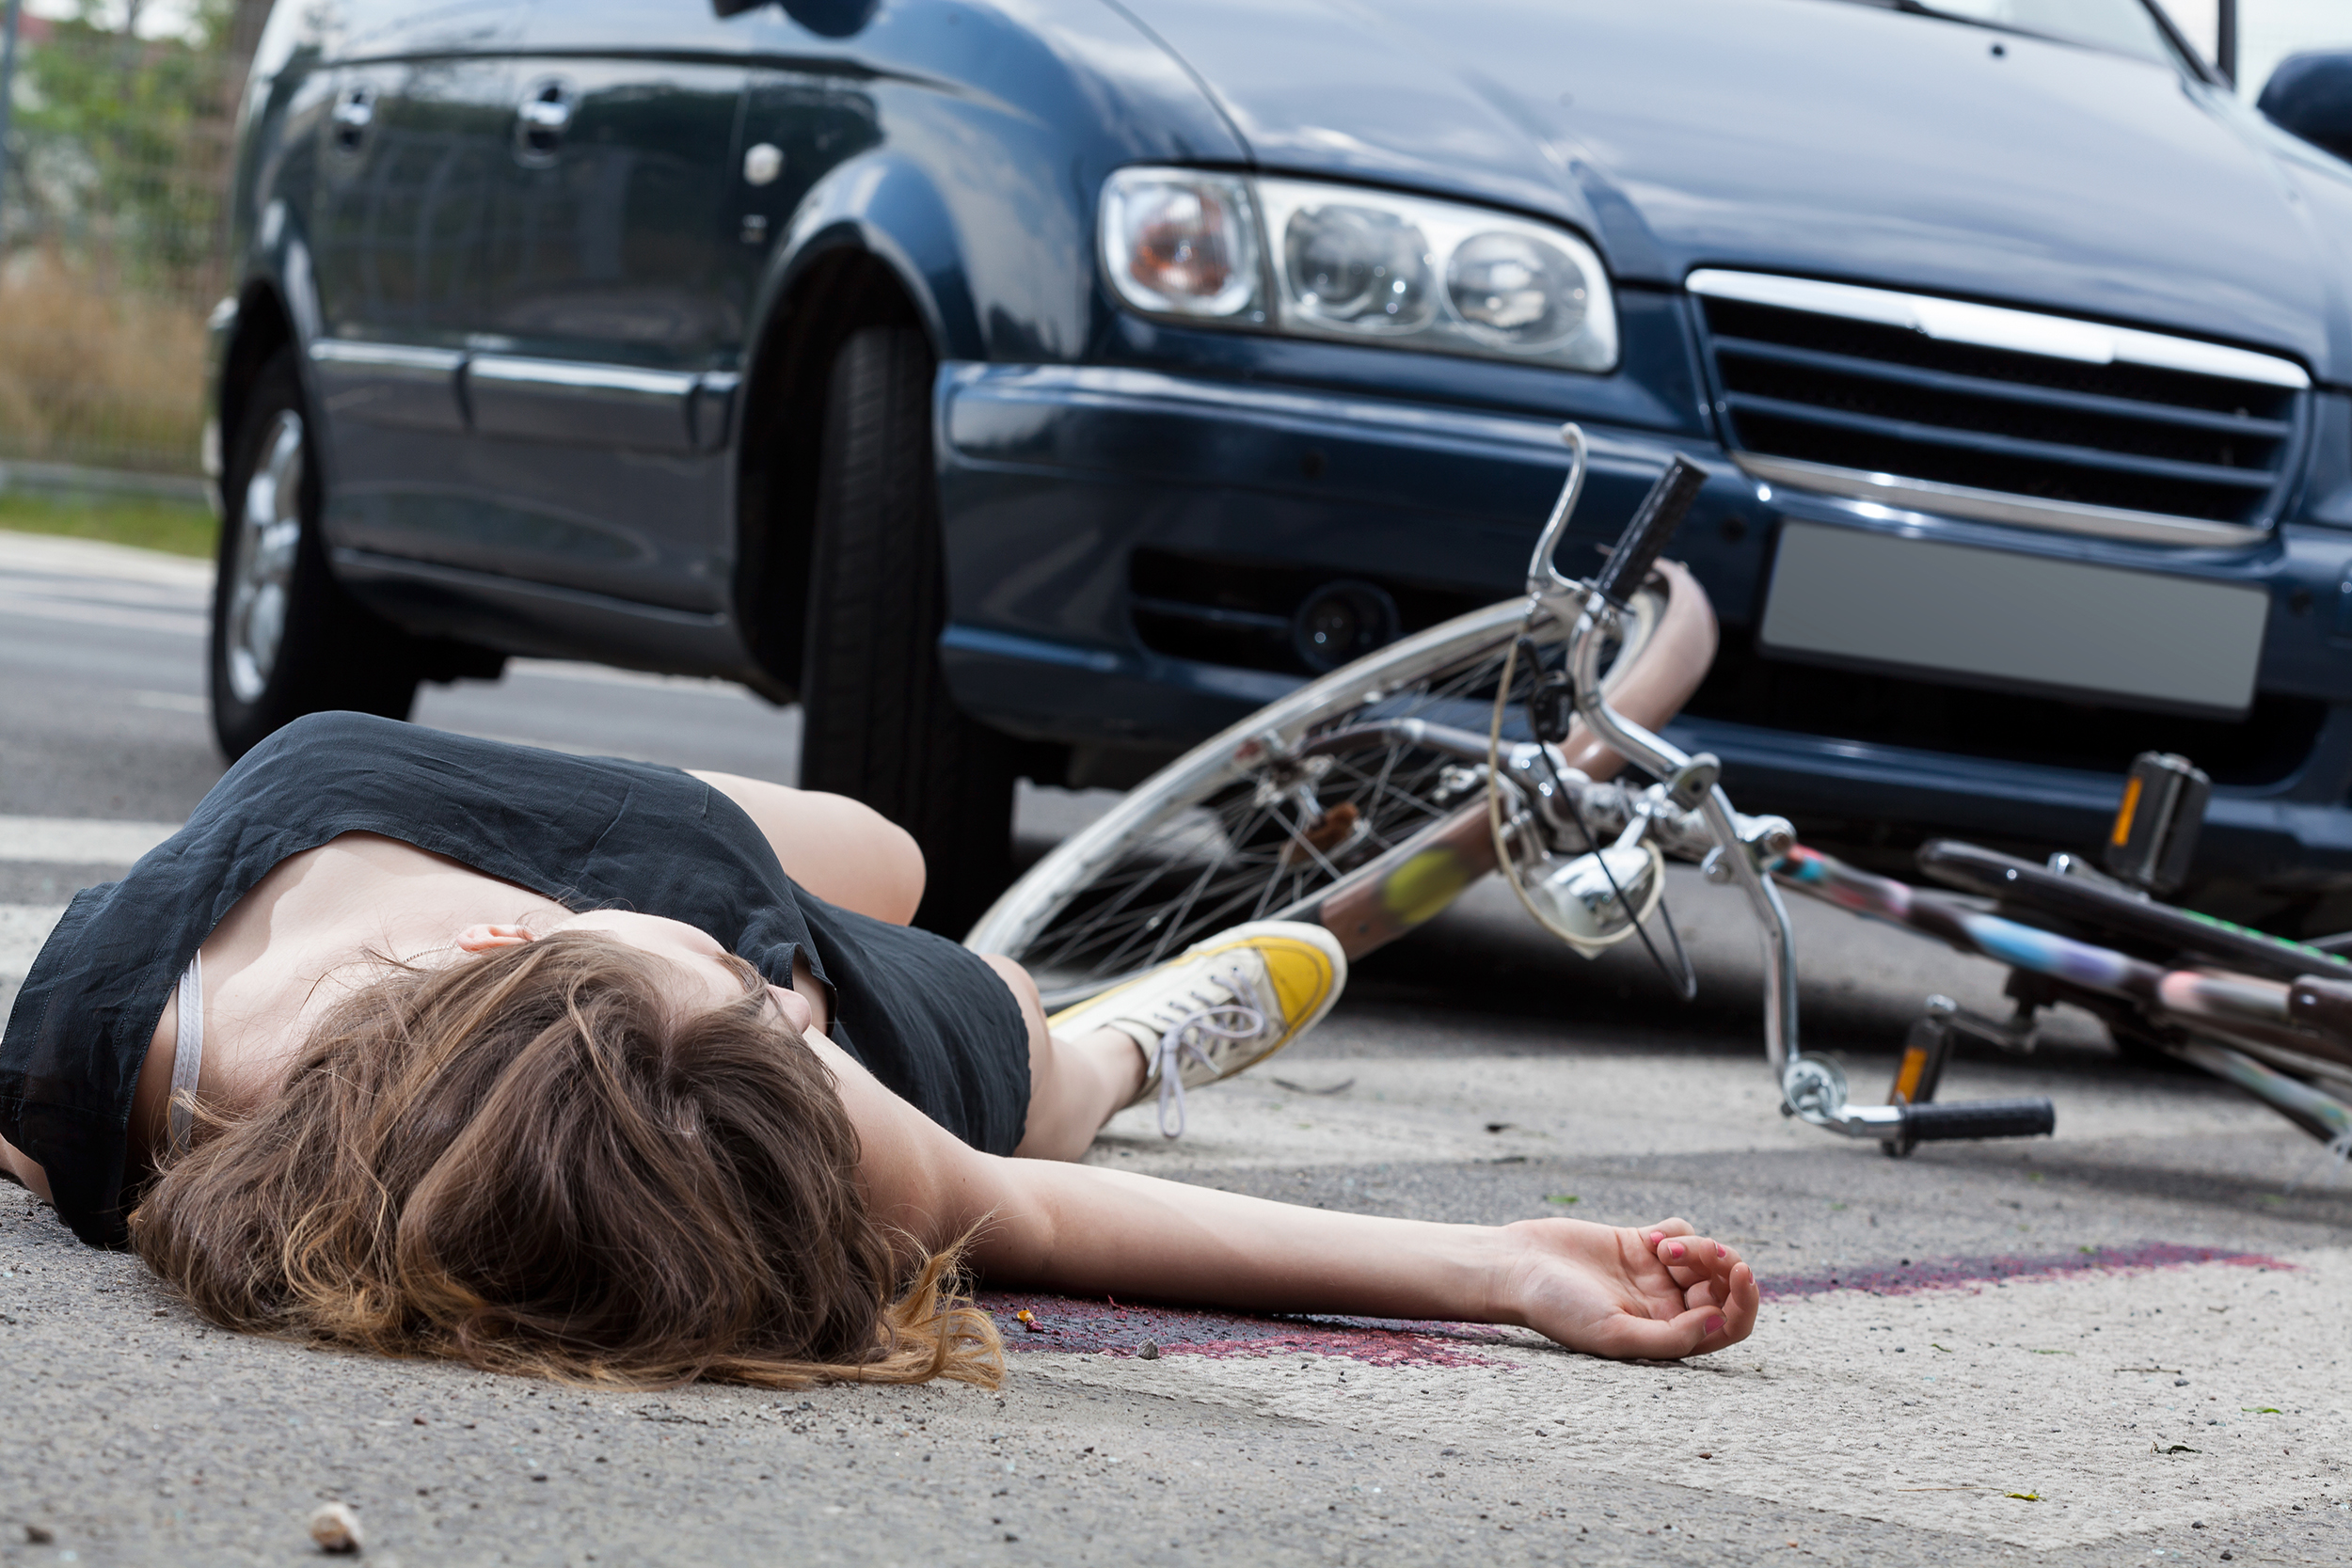 Bicycle and Pedestrian Accident Attorney in Boynton Beach Florida